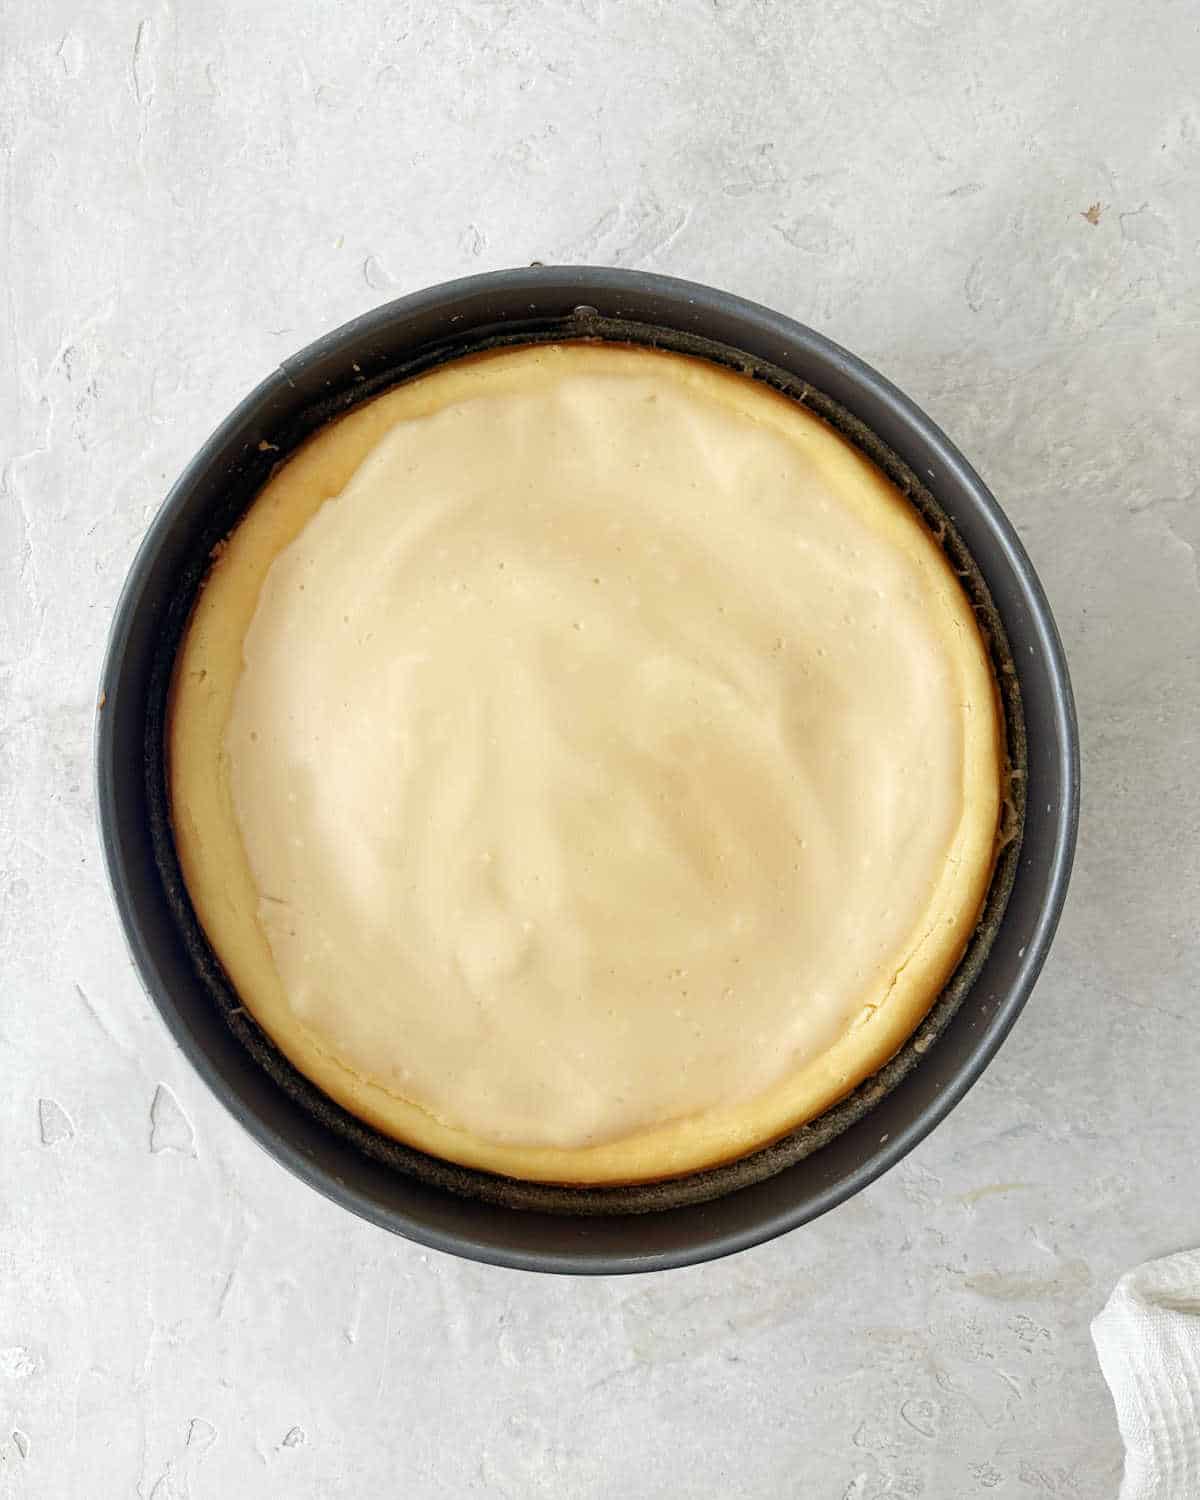 Baked Baileys cheesecake with sour cream topping on a metal pan. Light grey surface.